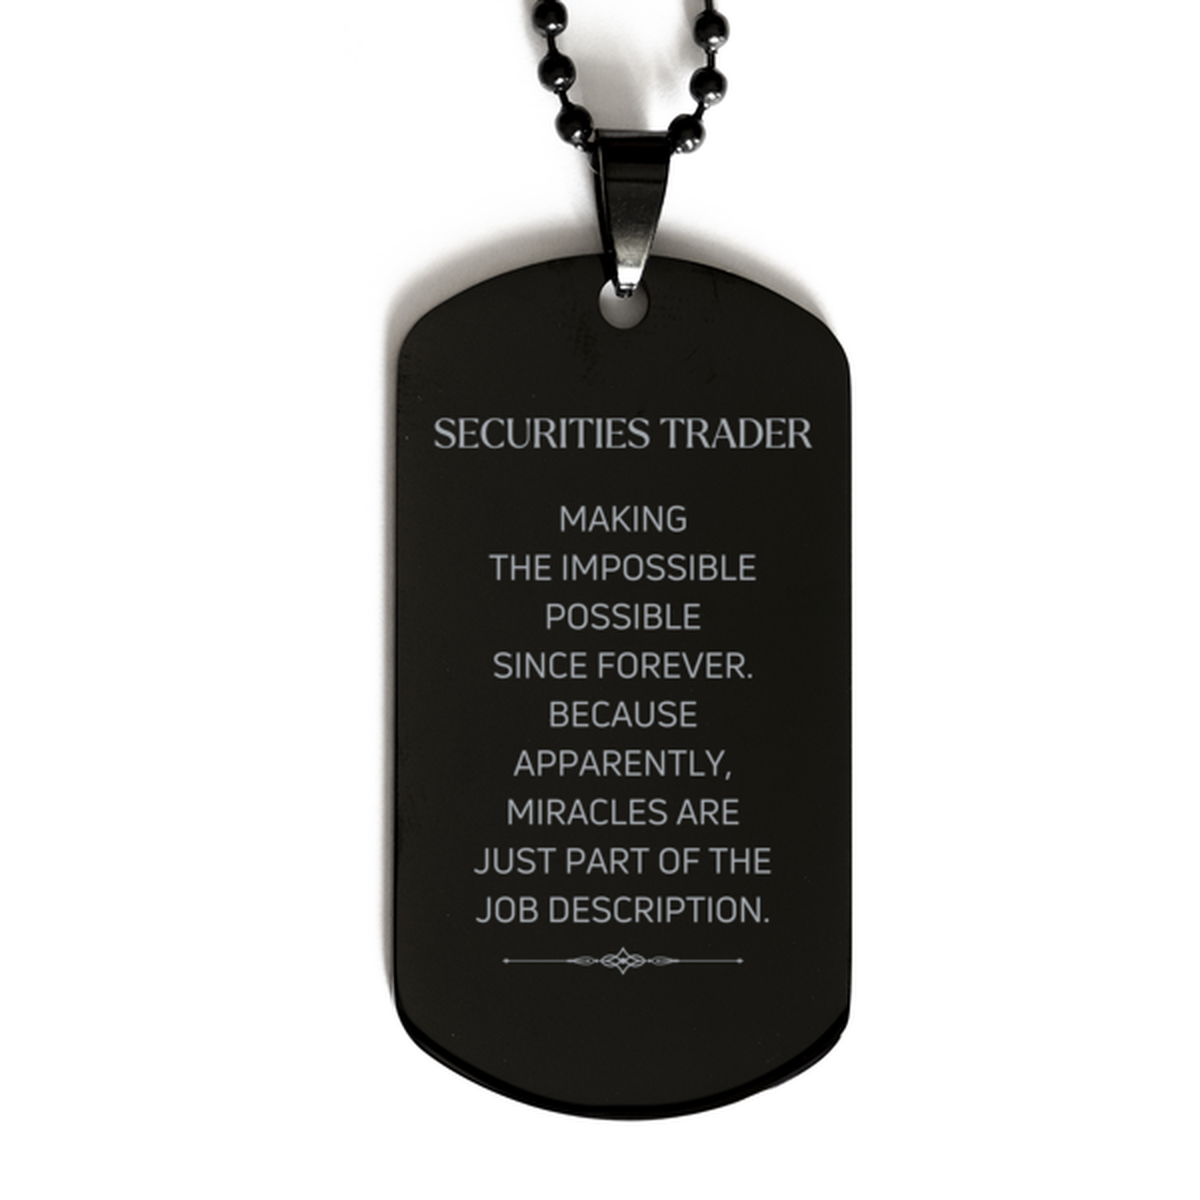 Funny Securities Trader Gifts, Miracles are just part of the job description, Inspirational Birthday Black Dog Tag For Securities Trader, Men, Women, Coworkers, Friends, Boss